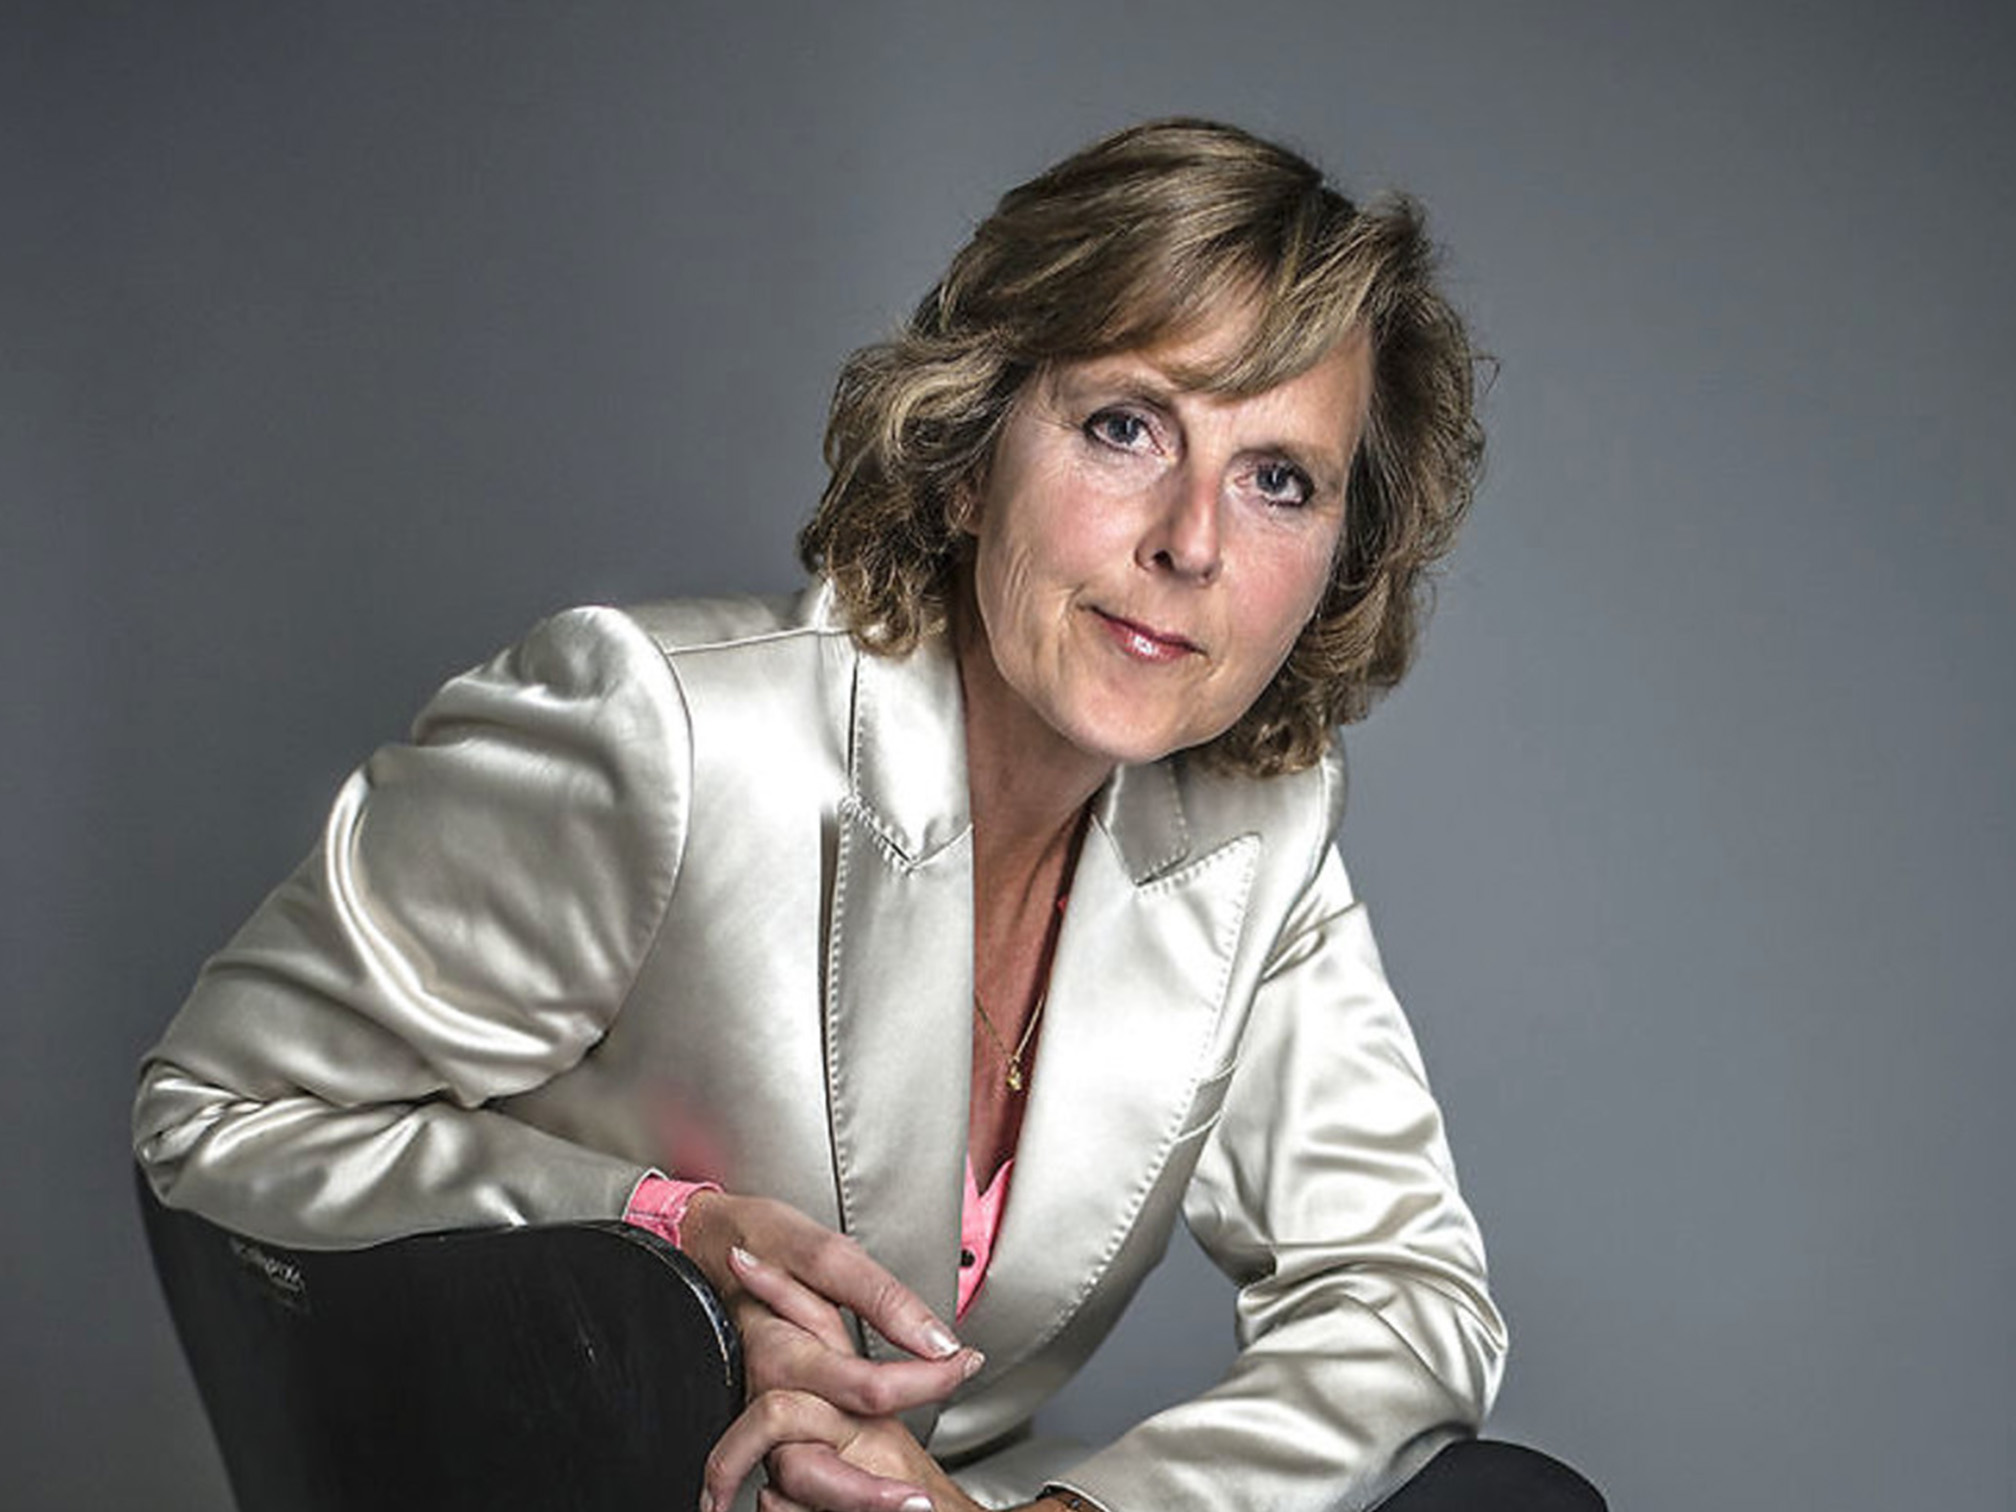 Connie HEDEGAARD